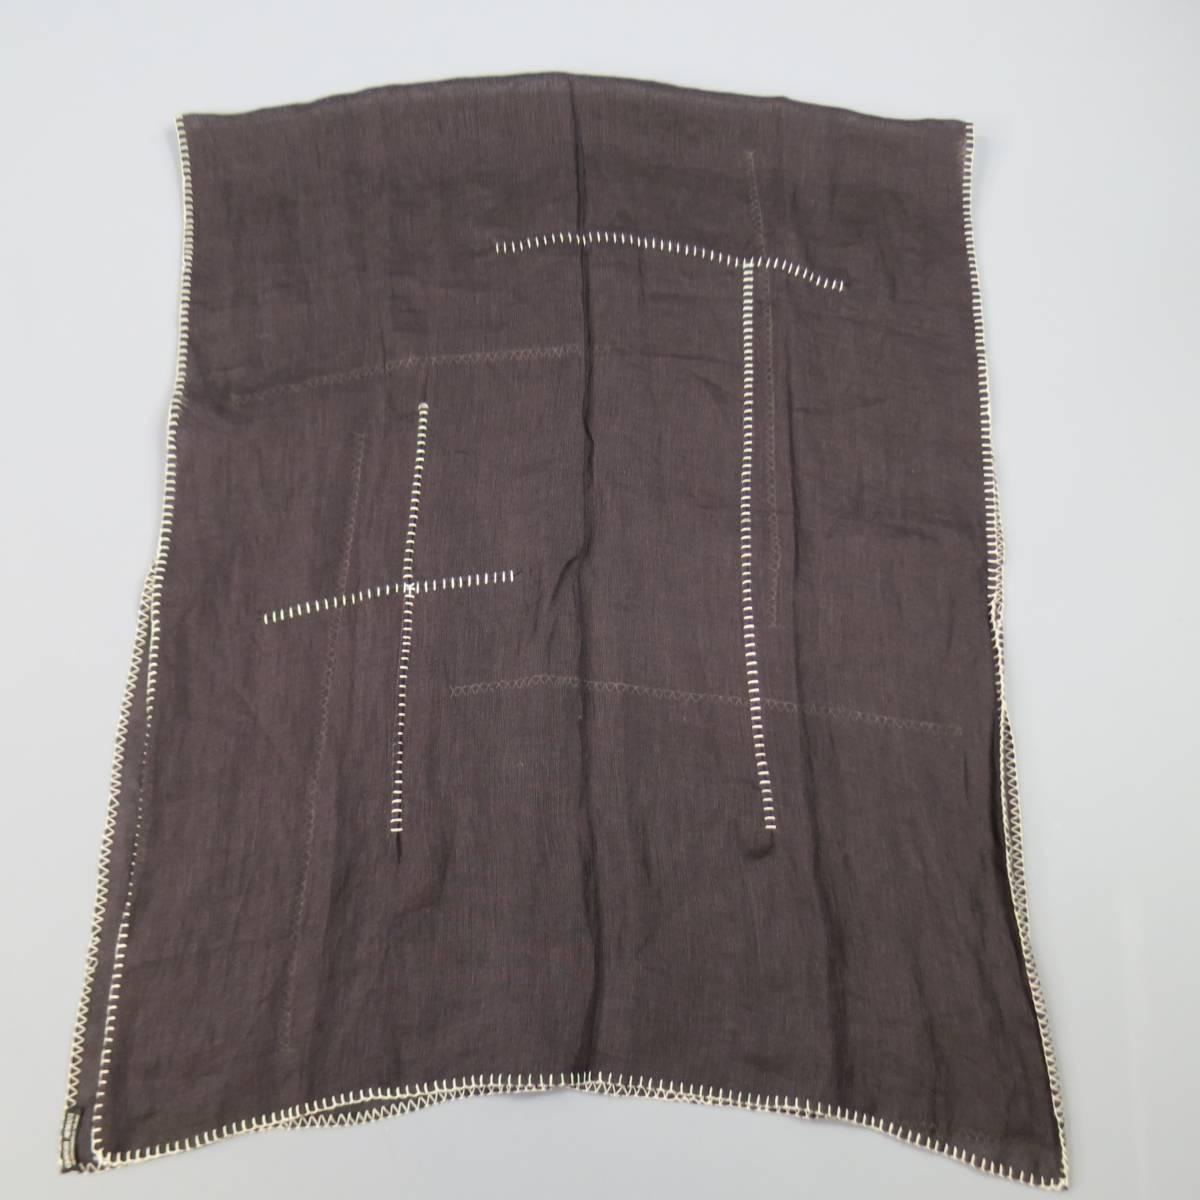 VINTAGE GIORGIO ARMANI Scarf consists of linen blend material in a brown color tone. Designed in a light weight fabric, white stitching along edges and body. Made in Italy.
 
Good Pre-Owned Condition 
Measurements:
 
Width: 30 in.
Length: 72